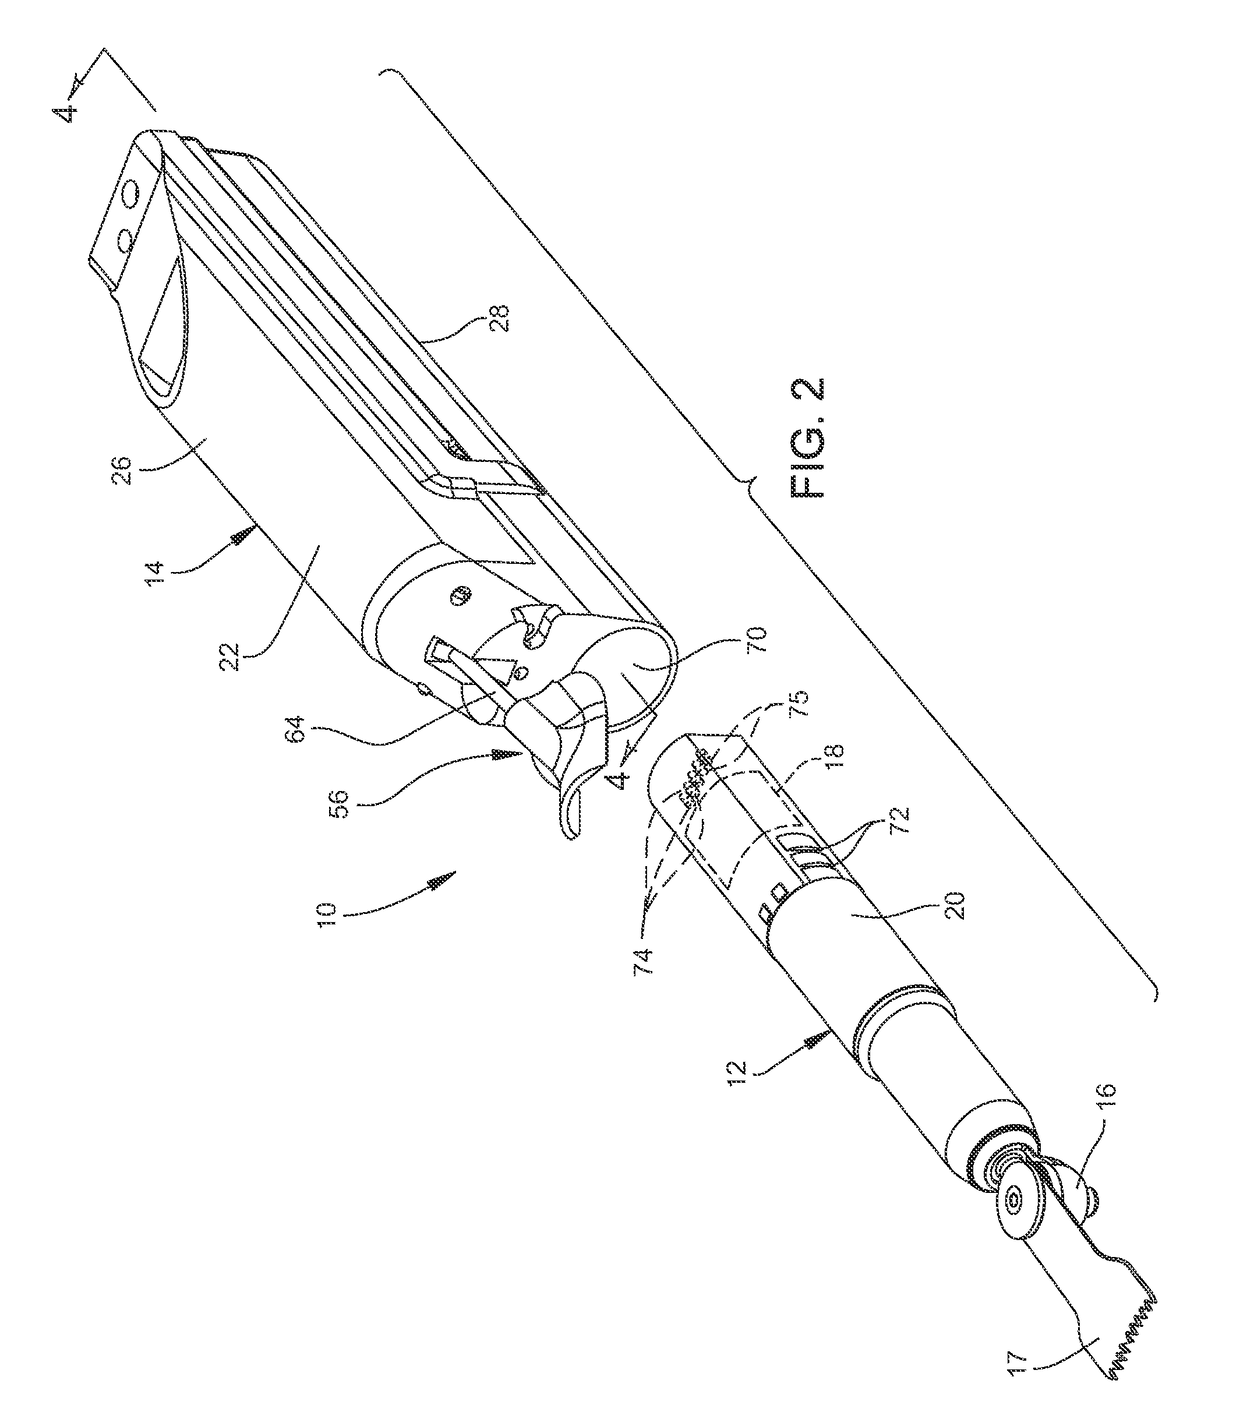 Surgical tool system with a tool unit that includes a power generating unit and a battery and control module that is releasably attached to the tool unit for energizing and controlling the power generating unit